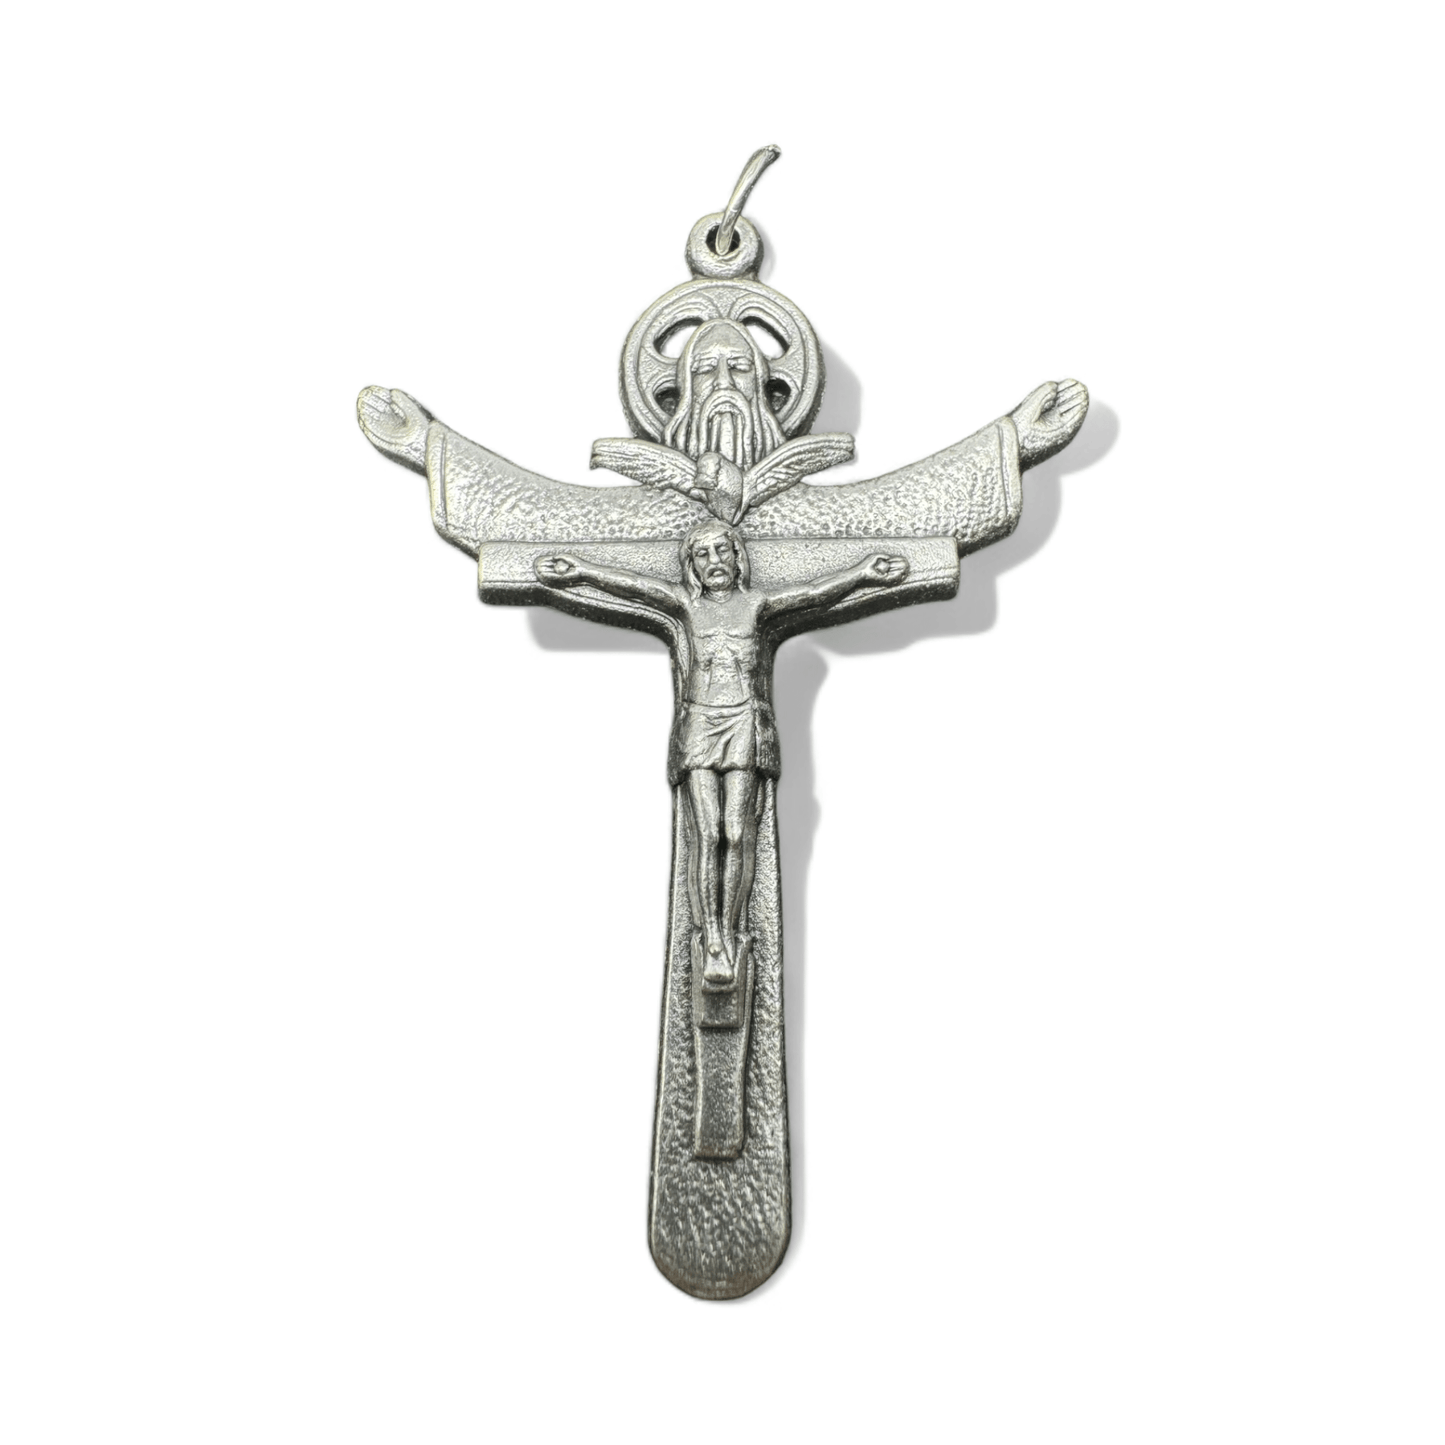 Catholically Crucifix The Tertium Millennium Holy Trinity Cross Crucifix Blessed By Pope - Pendant